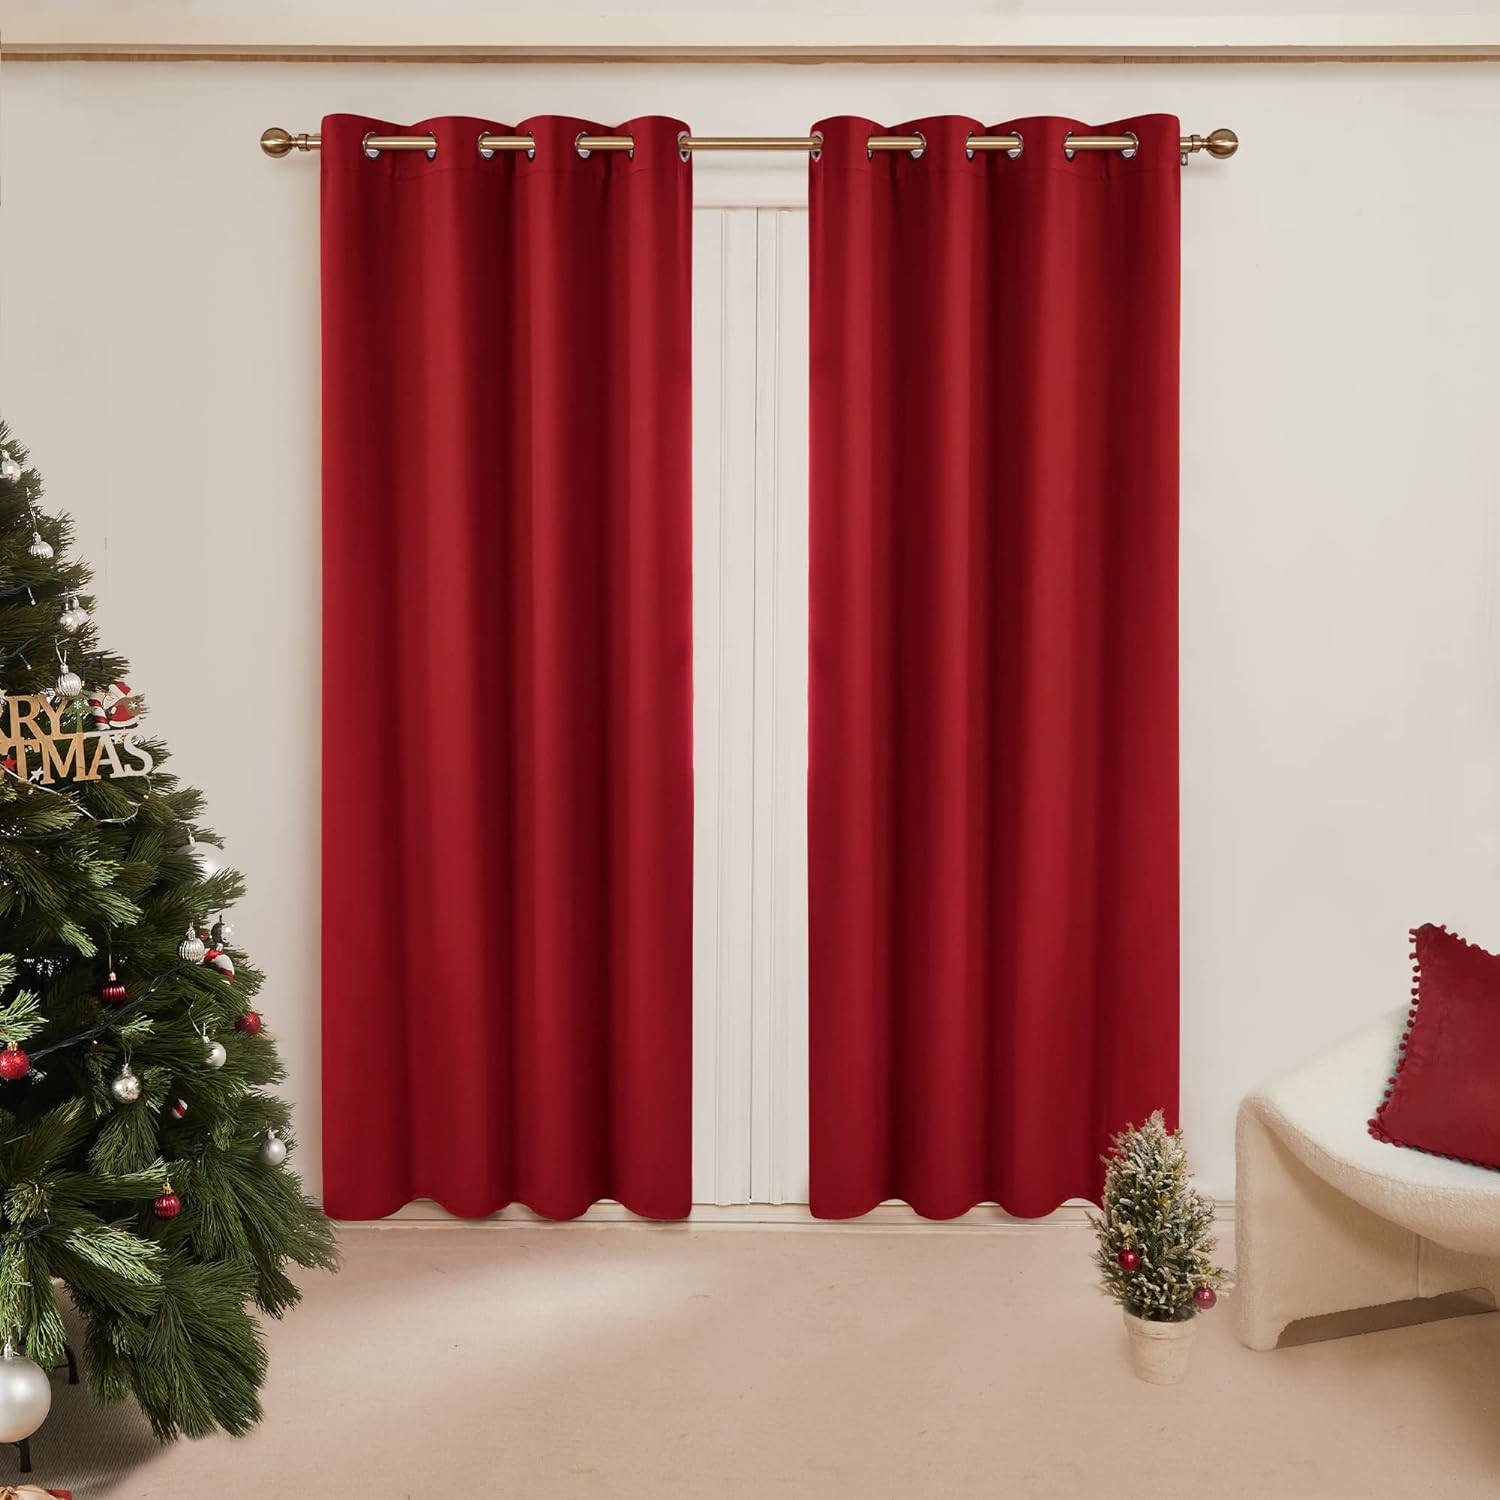 Deconovo Long Curtains, Red Blackout Drapes 108 Inch Length, Thermal Curtains, Soundproof Window Treatments (True Red, 52Wx108L Inch, Set of 2)